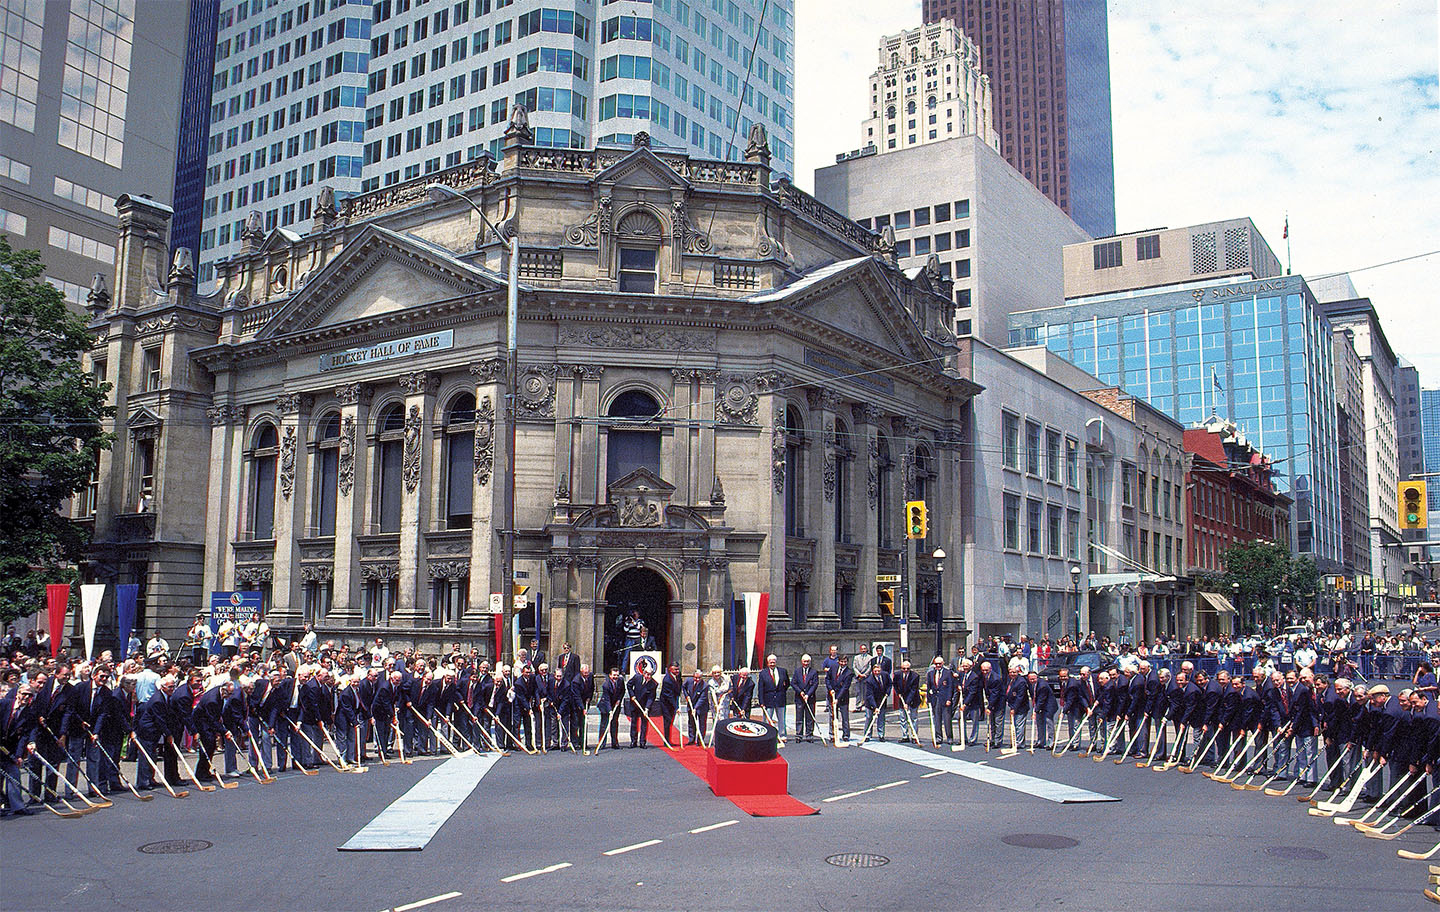 Sixty-eight Honoured Members participated in the ‘world’s largest face-off' at the corner of Yonge & Front as part of Hockey Hall of Fame’s opening festivities celebrating their new location in downtown Toronto.